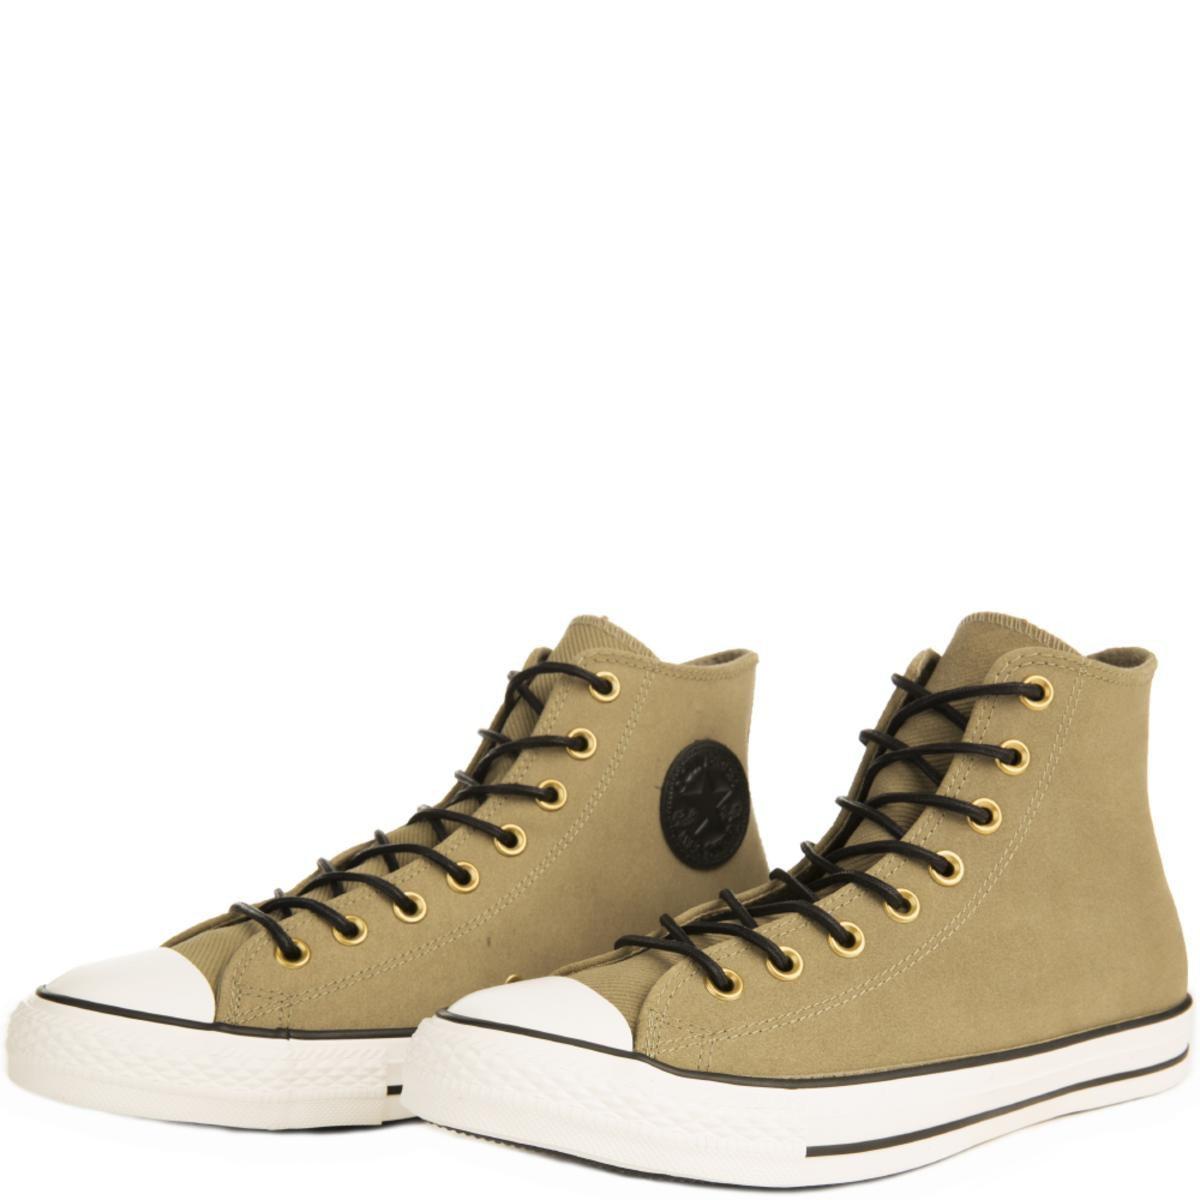 Converse Chuck Taylor All Star Crafted Khaki Suede High Tops in Natural for  Men - Lyst